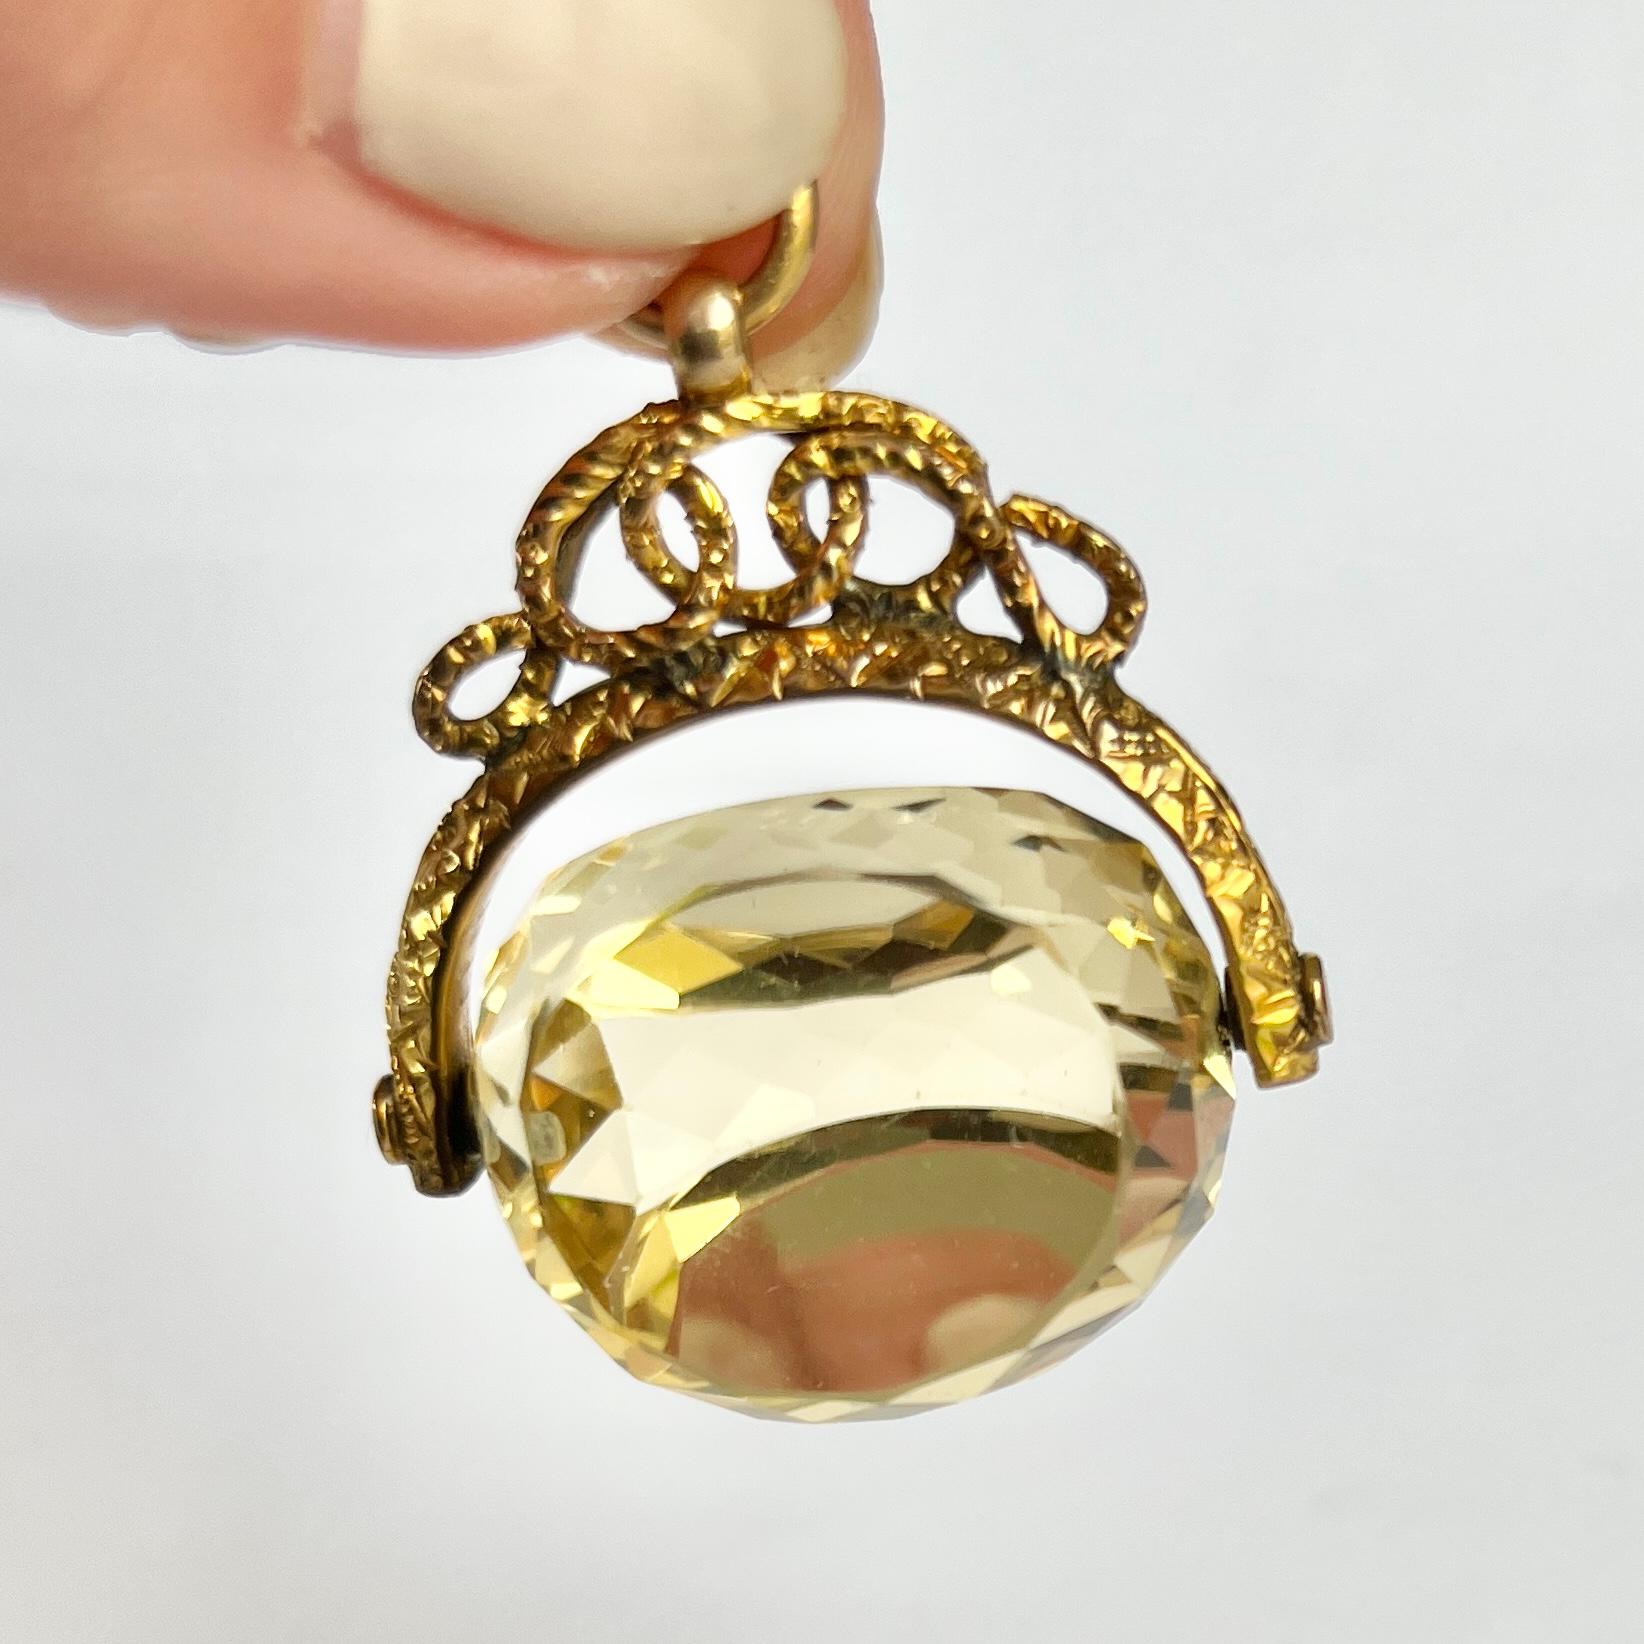 This gorgeous swivel fob holds a yellow citrine stone and the frame and loop is modelled out of 9ct gold. The frame has a snake like feel to it and twists and turns. 

Height including Loop: 40mm

Weight: 15.8g 